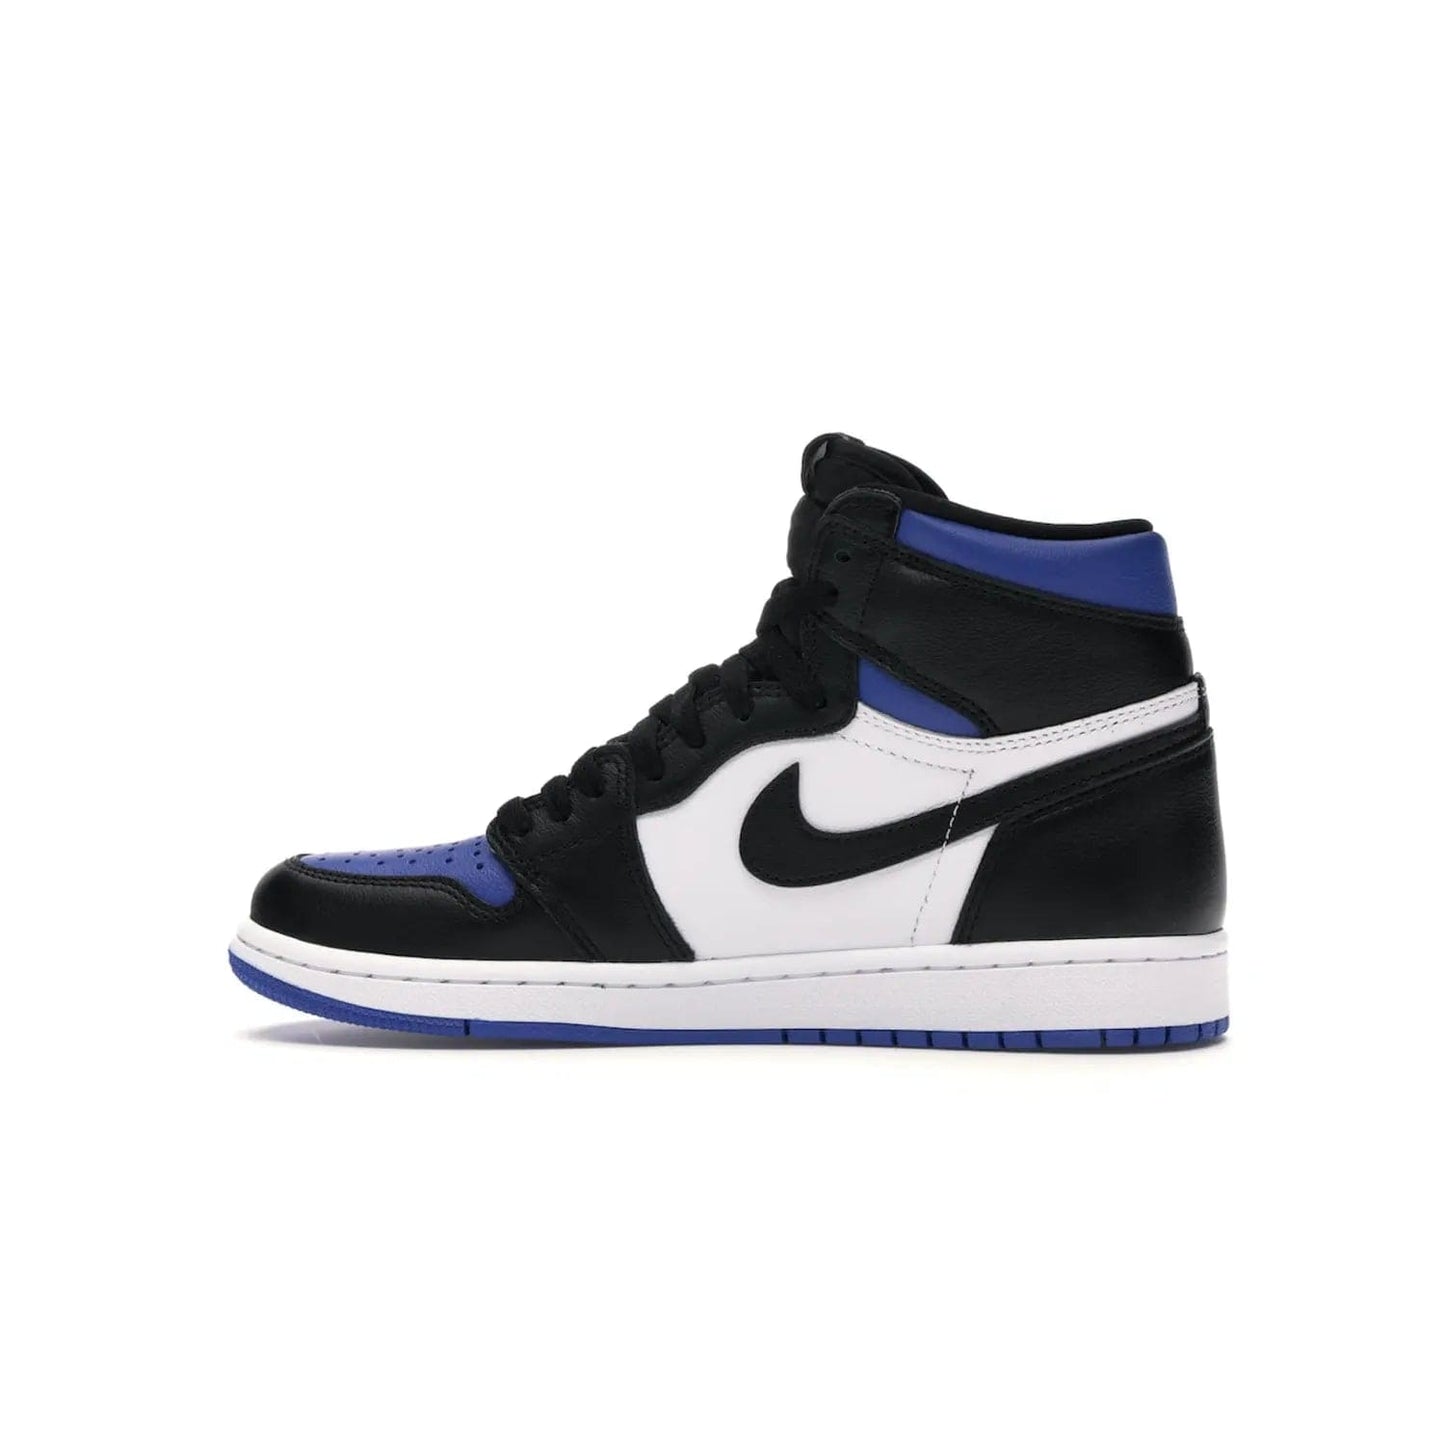 Jordan 1 Retro High Royal Toe - Image 20 - Only at www.BallersClubKickz.com - Refresh your look with the Jordan 1 Retro High Royal Toe. This classic AJ 1 sports a white and royal leather upper, black leather overlays, and branded leather tongue tag. Pick up today and set the streets ablaze.